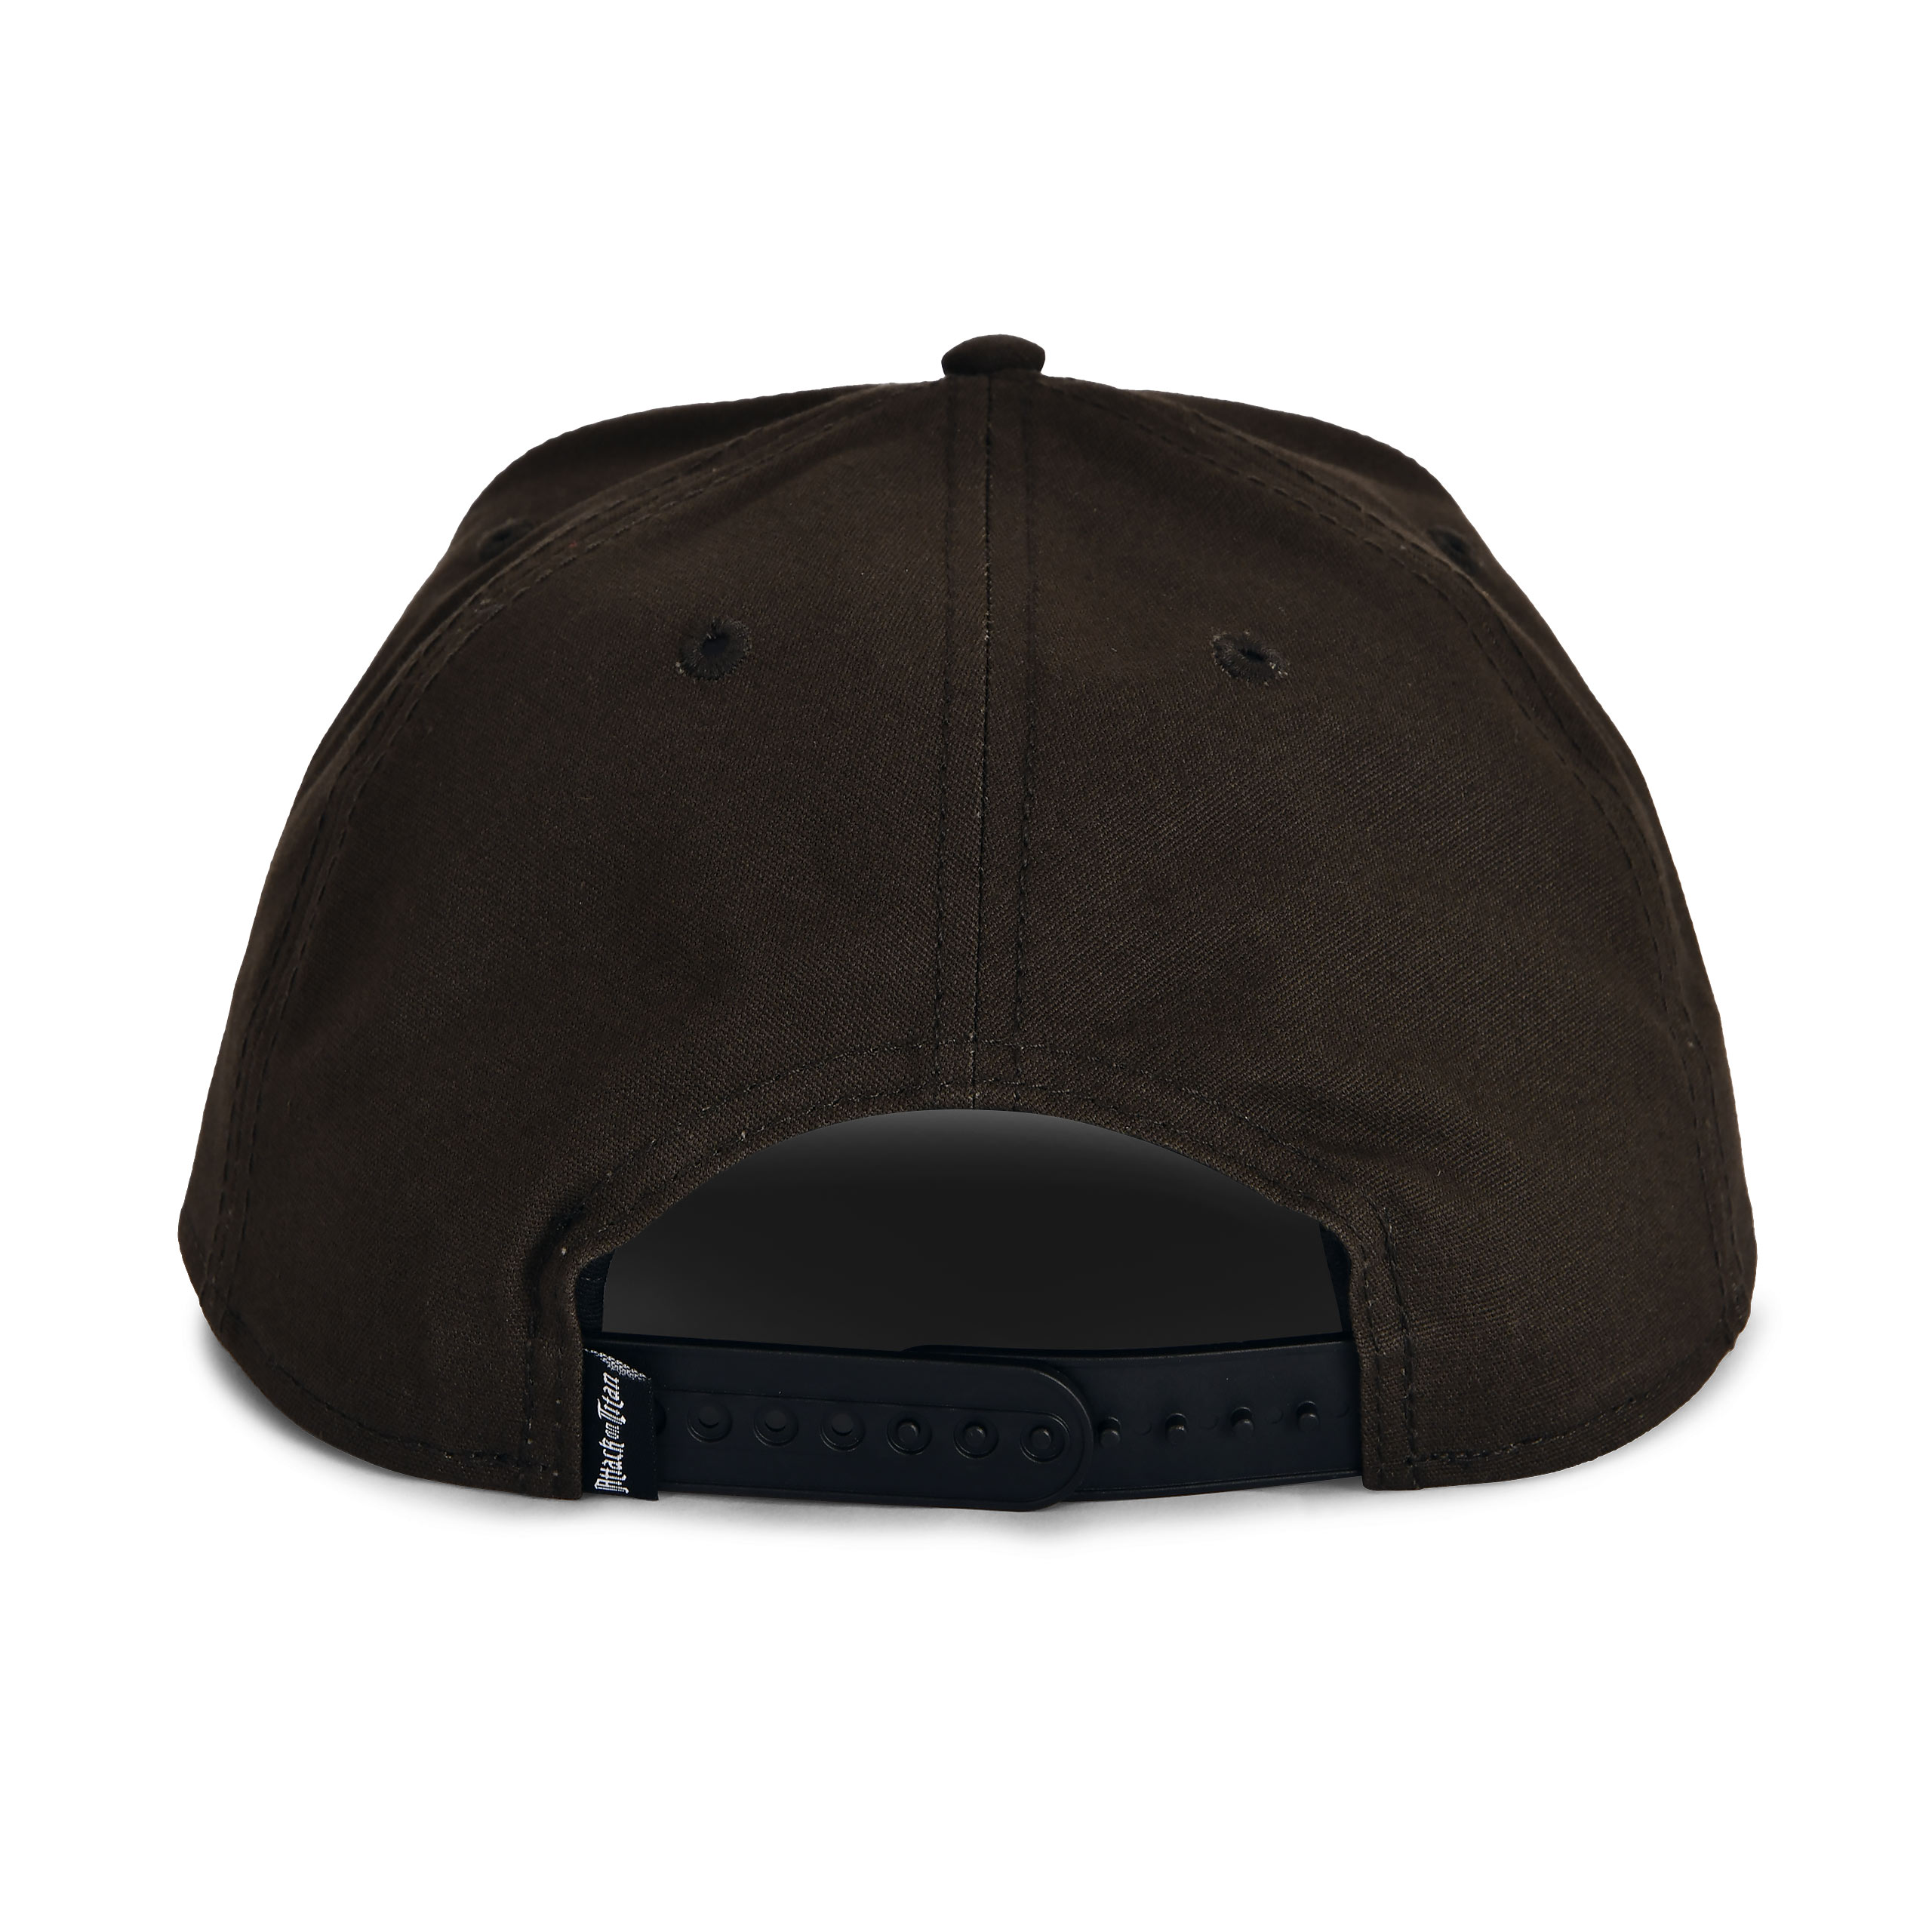 Attack on Titan - Scout Snapback Cap